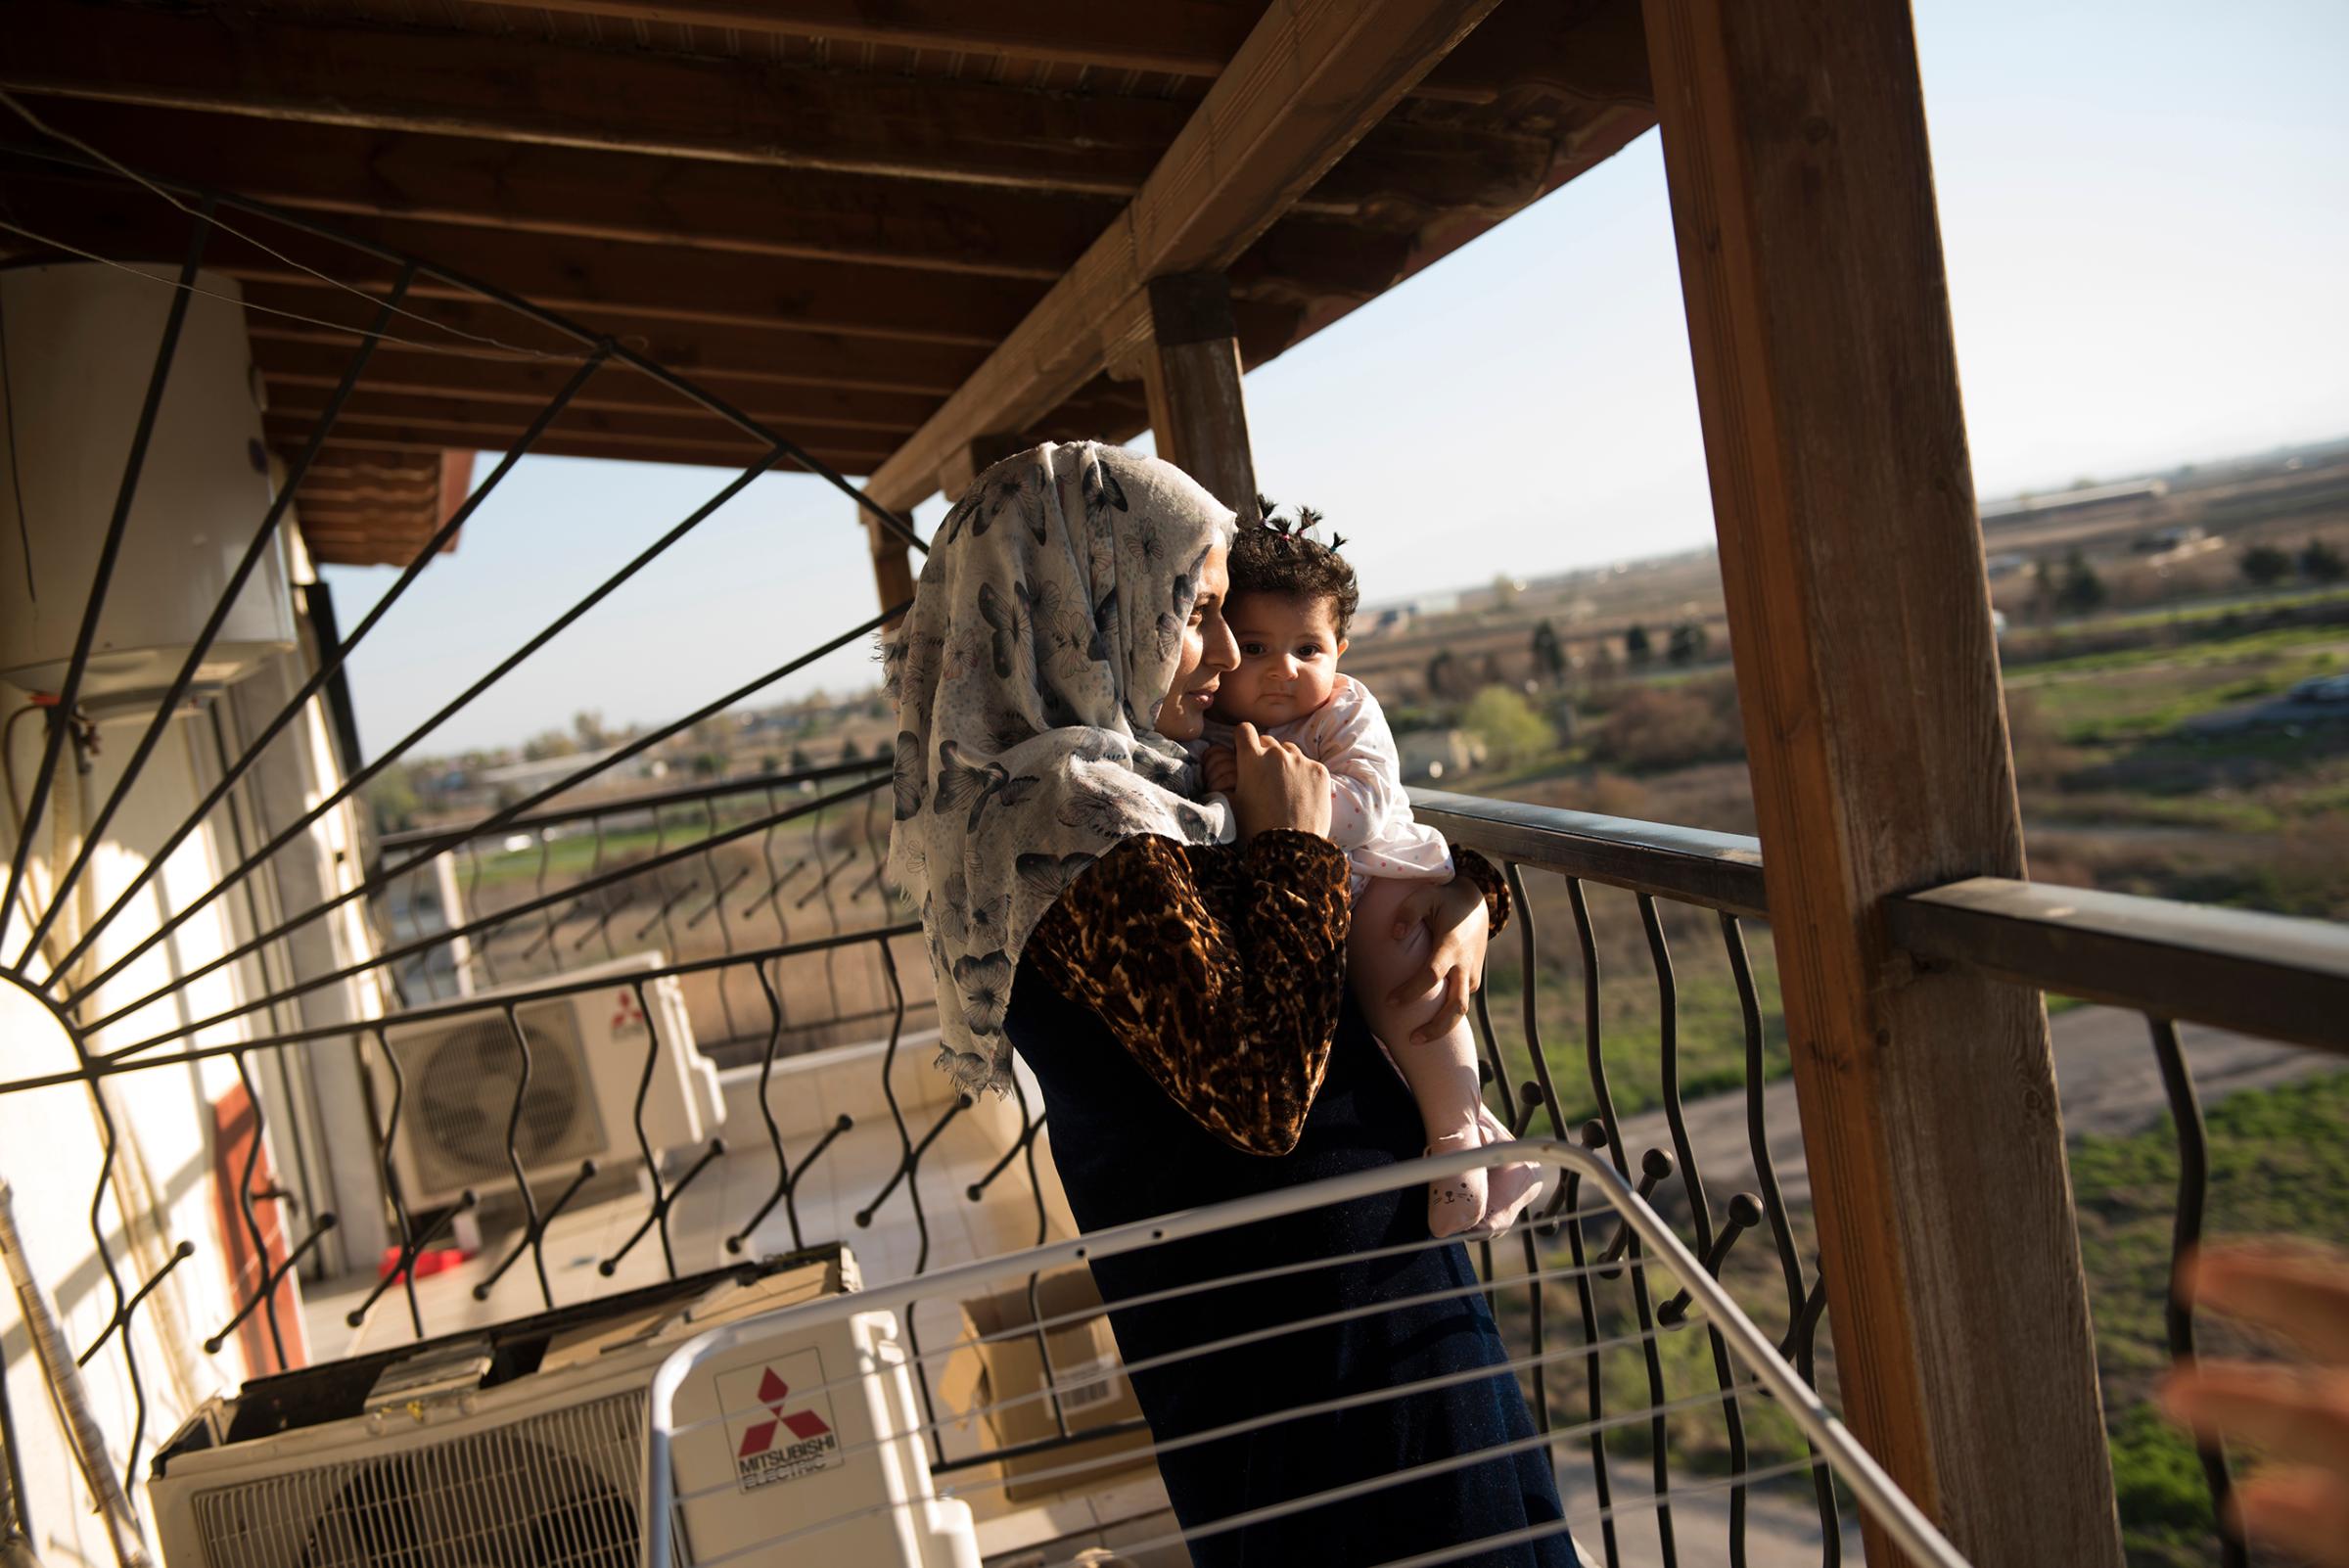 Noor Al Talaa, 22, stands on the balcony at dusk with baby Rahaf, almost 6 months, at an apartment in Sidros, outside of Thessaloniki, Greece, March 28, 2017.